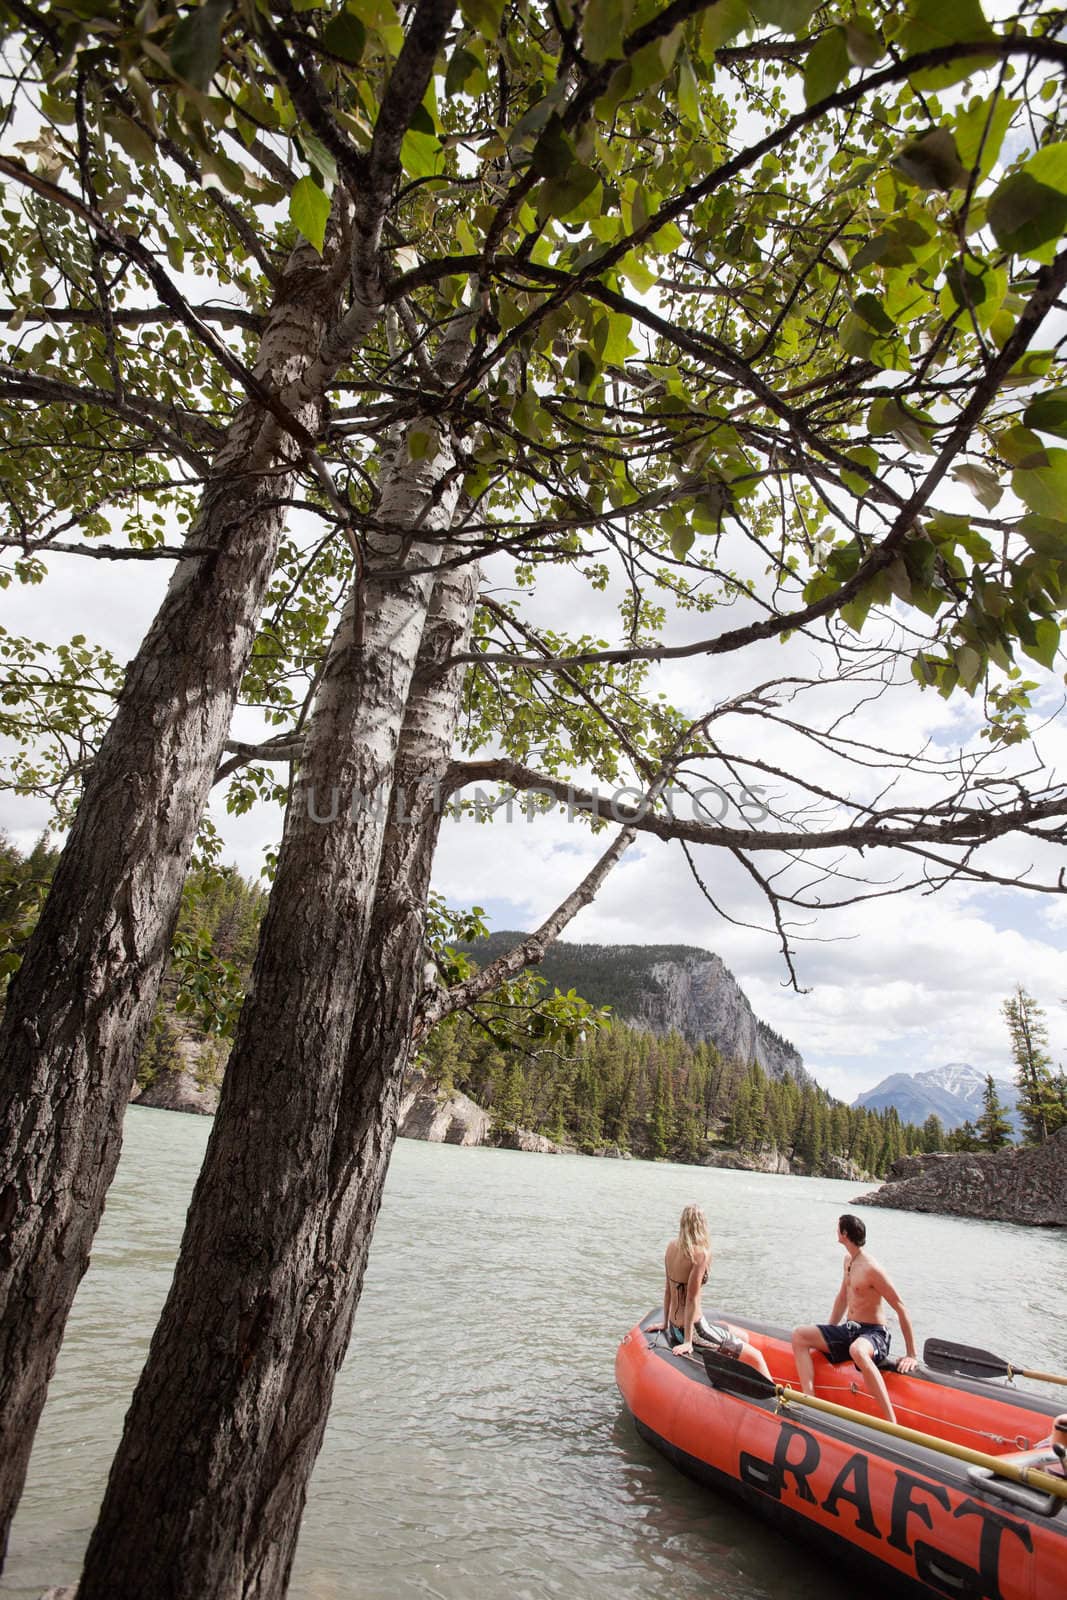 Couple enjoying their vacation by leaf